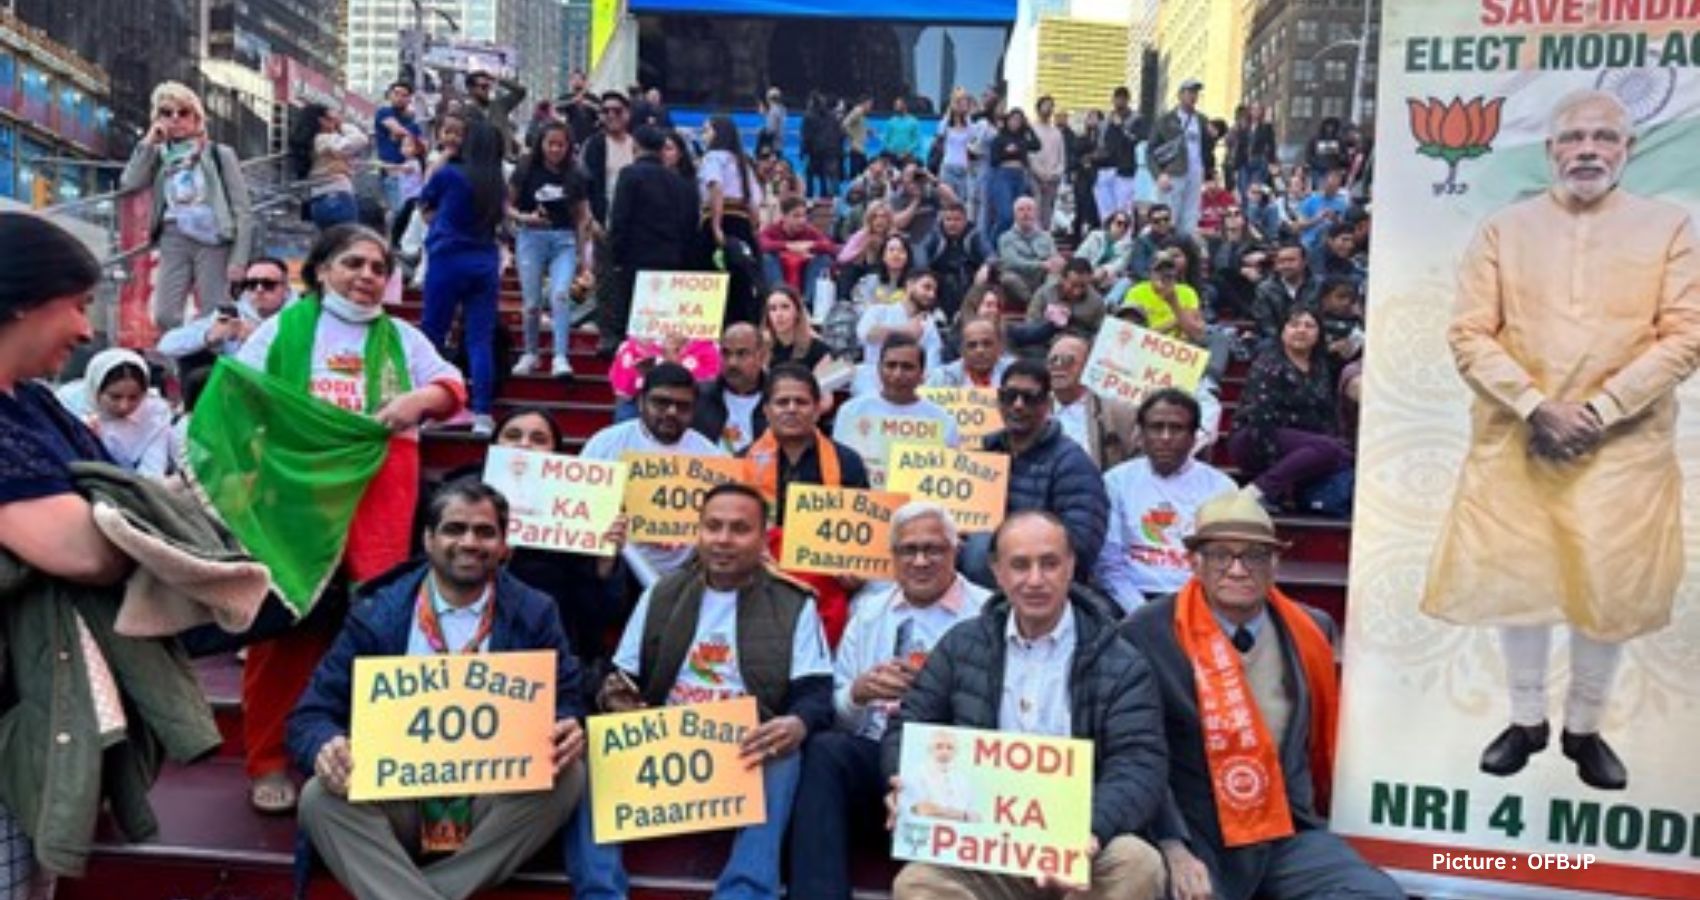 Featured & Cover OFBJP Supporters Rally at Times Square in Solidarity with Modi Global Display of Unity